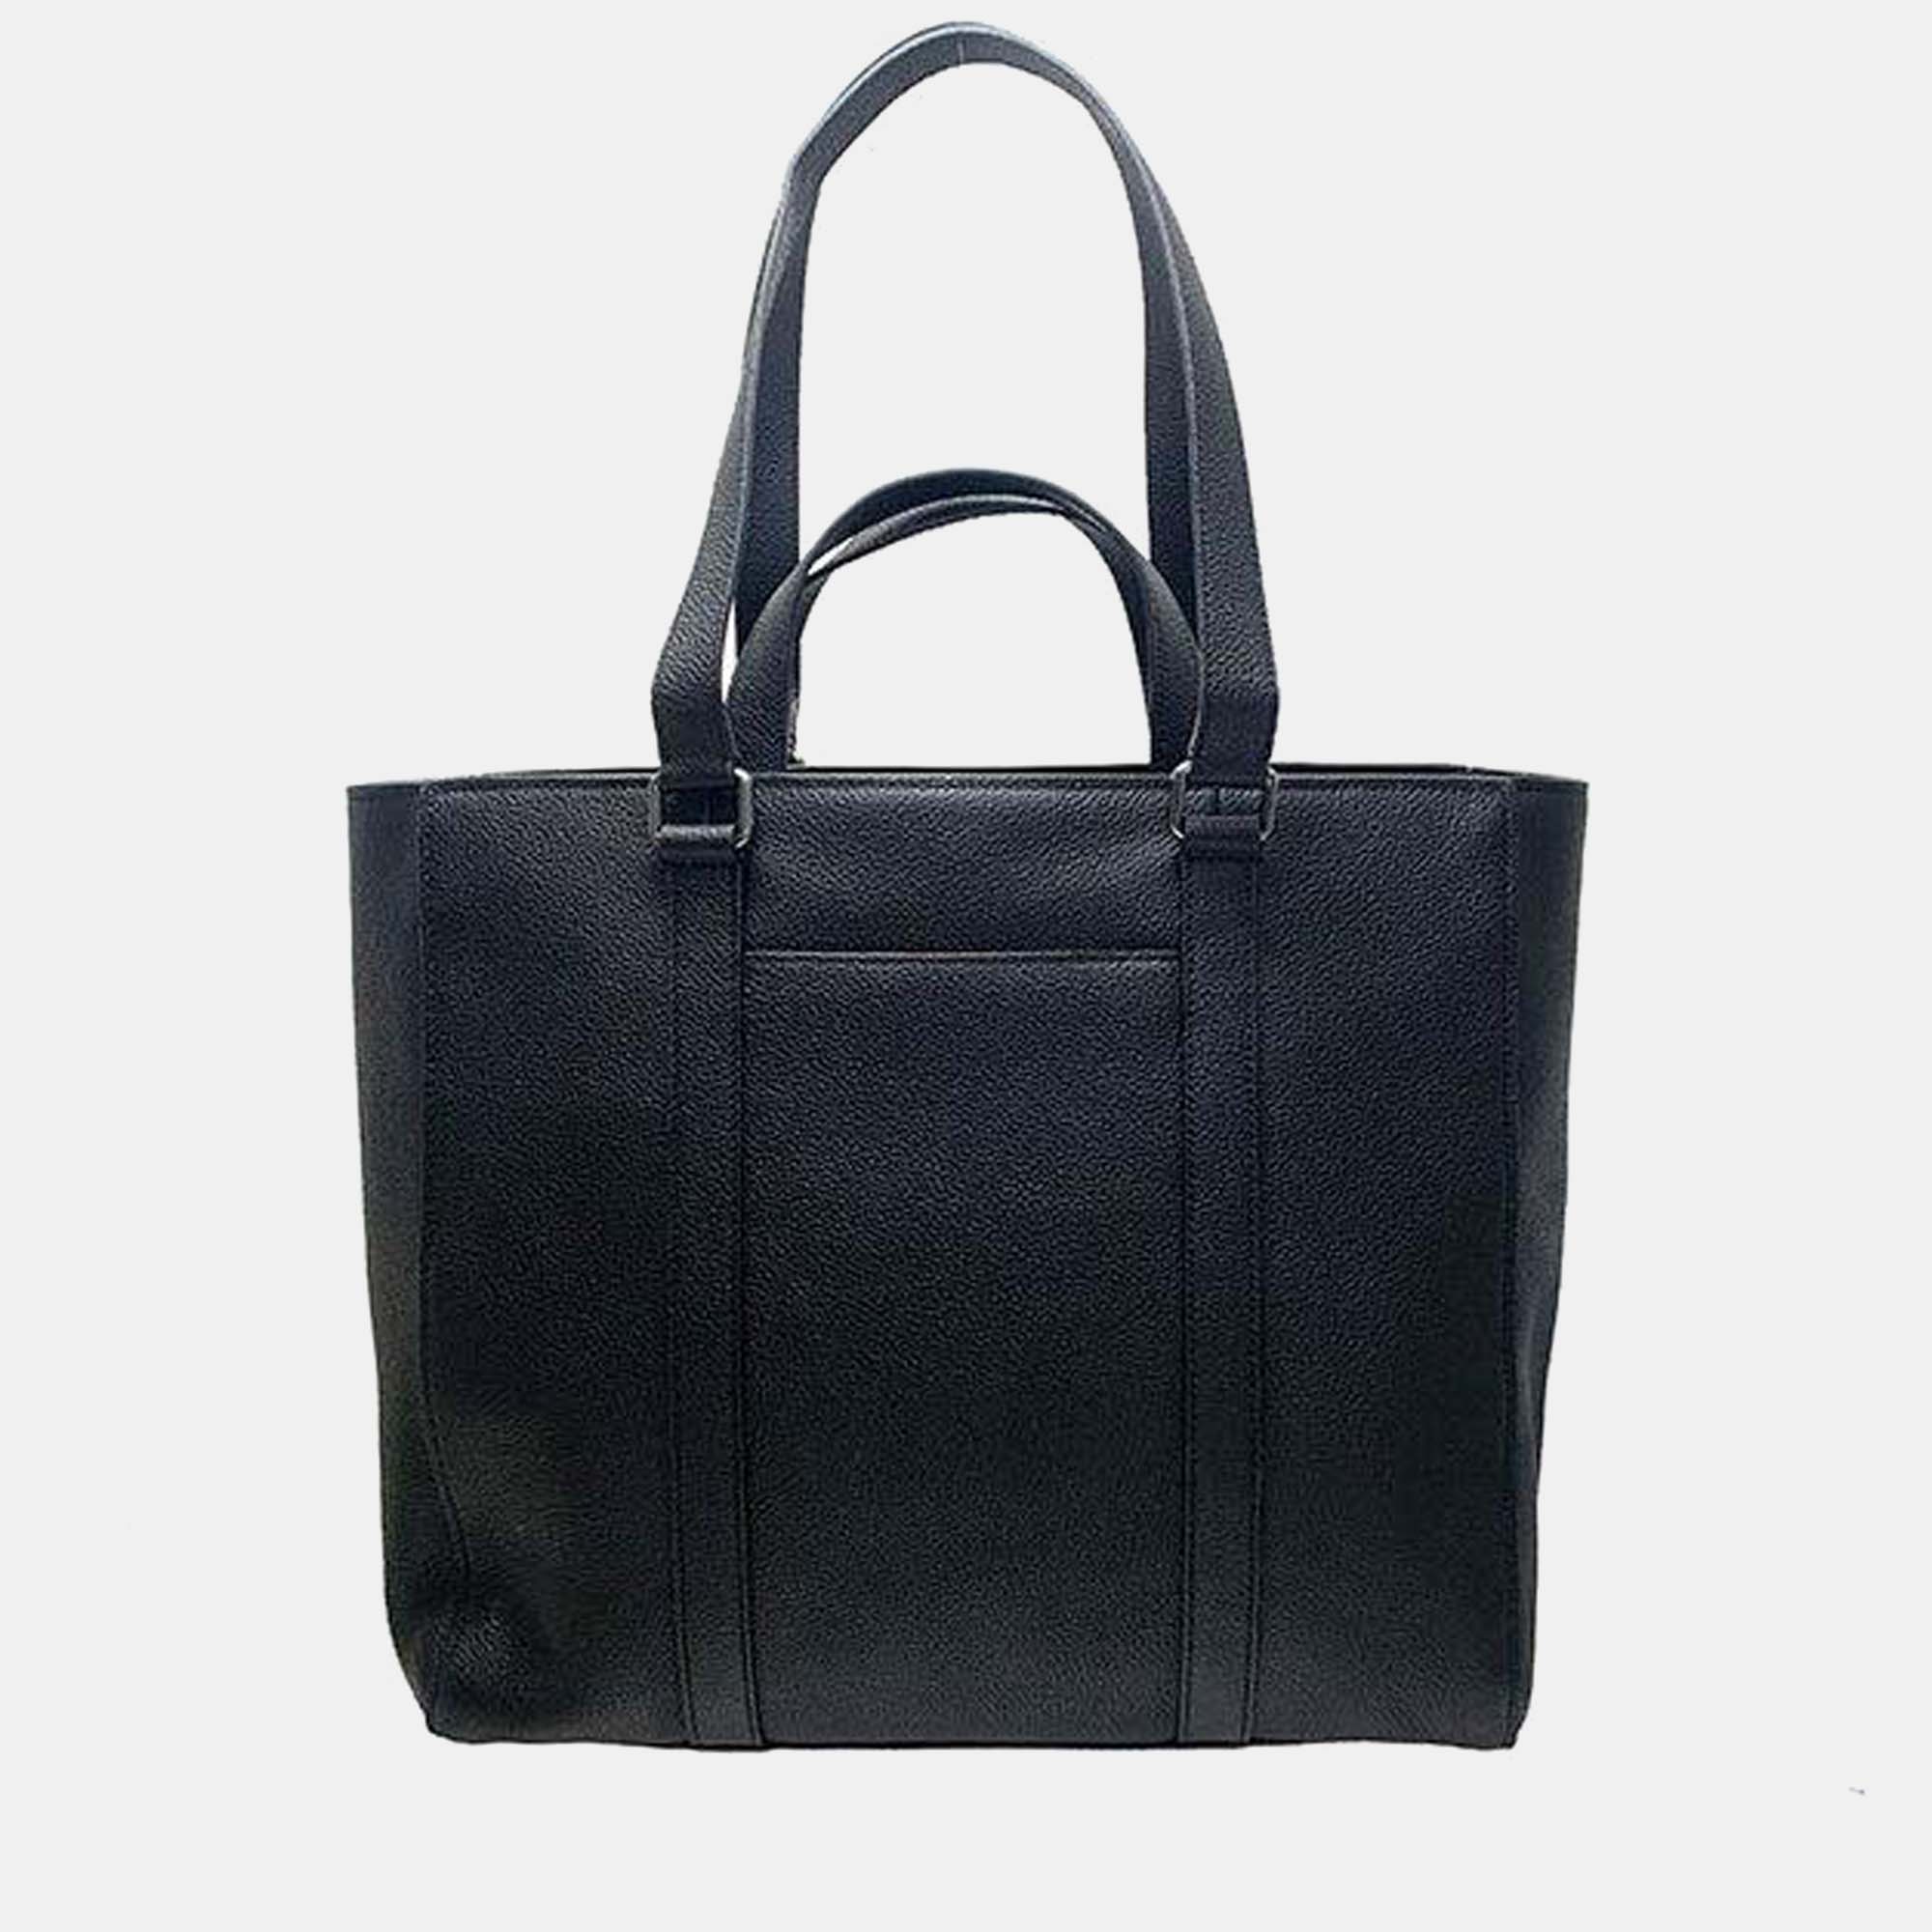 Pre-owned Coach Black - Leather - Double Handle Tote Bag